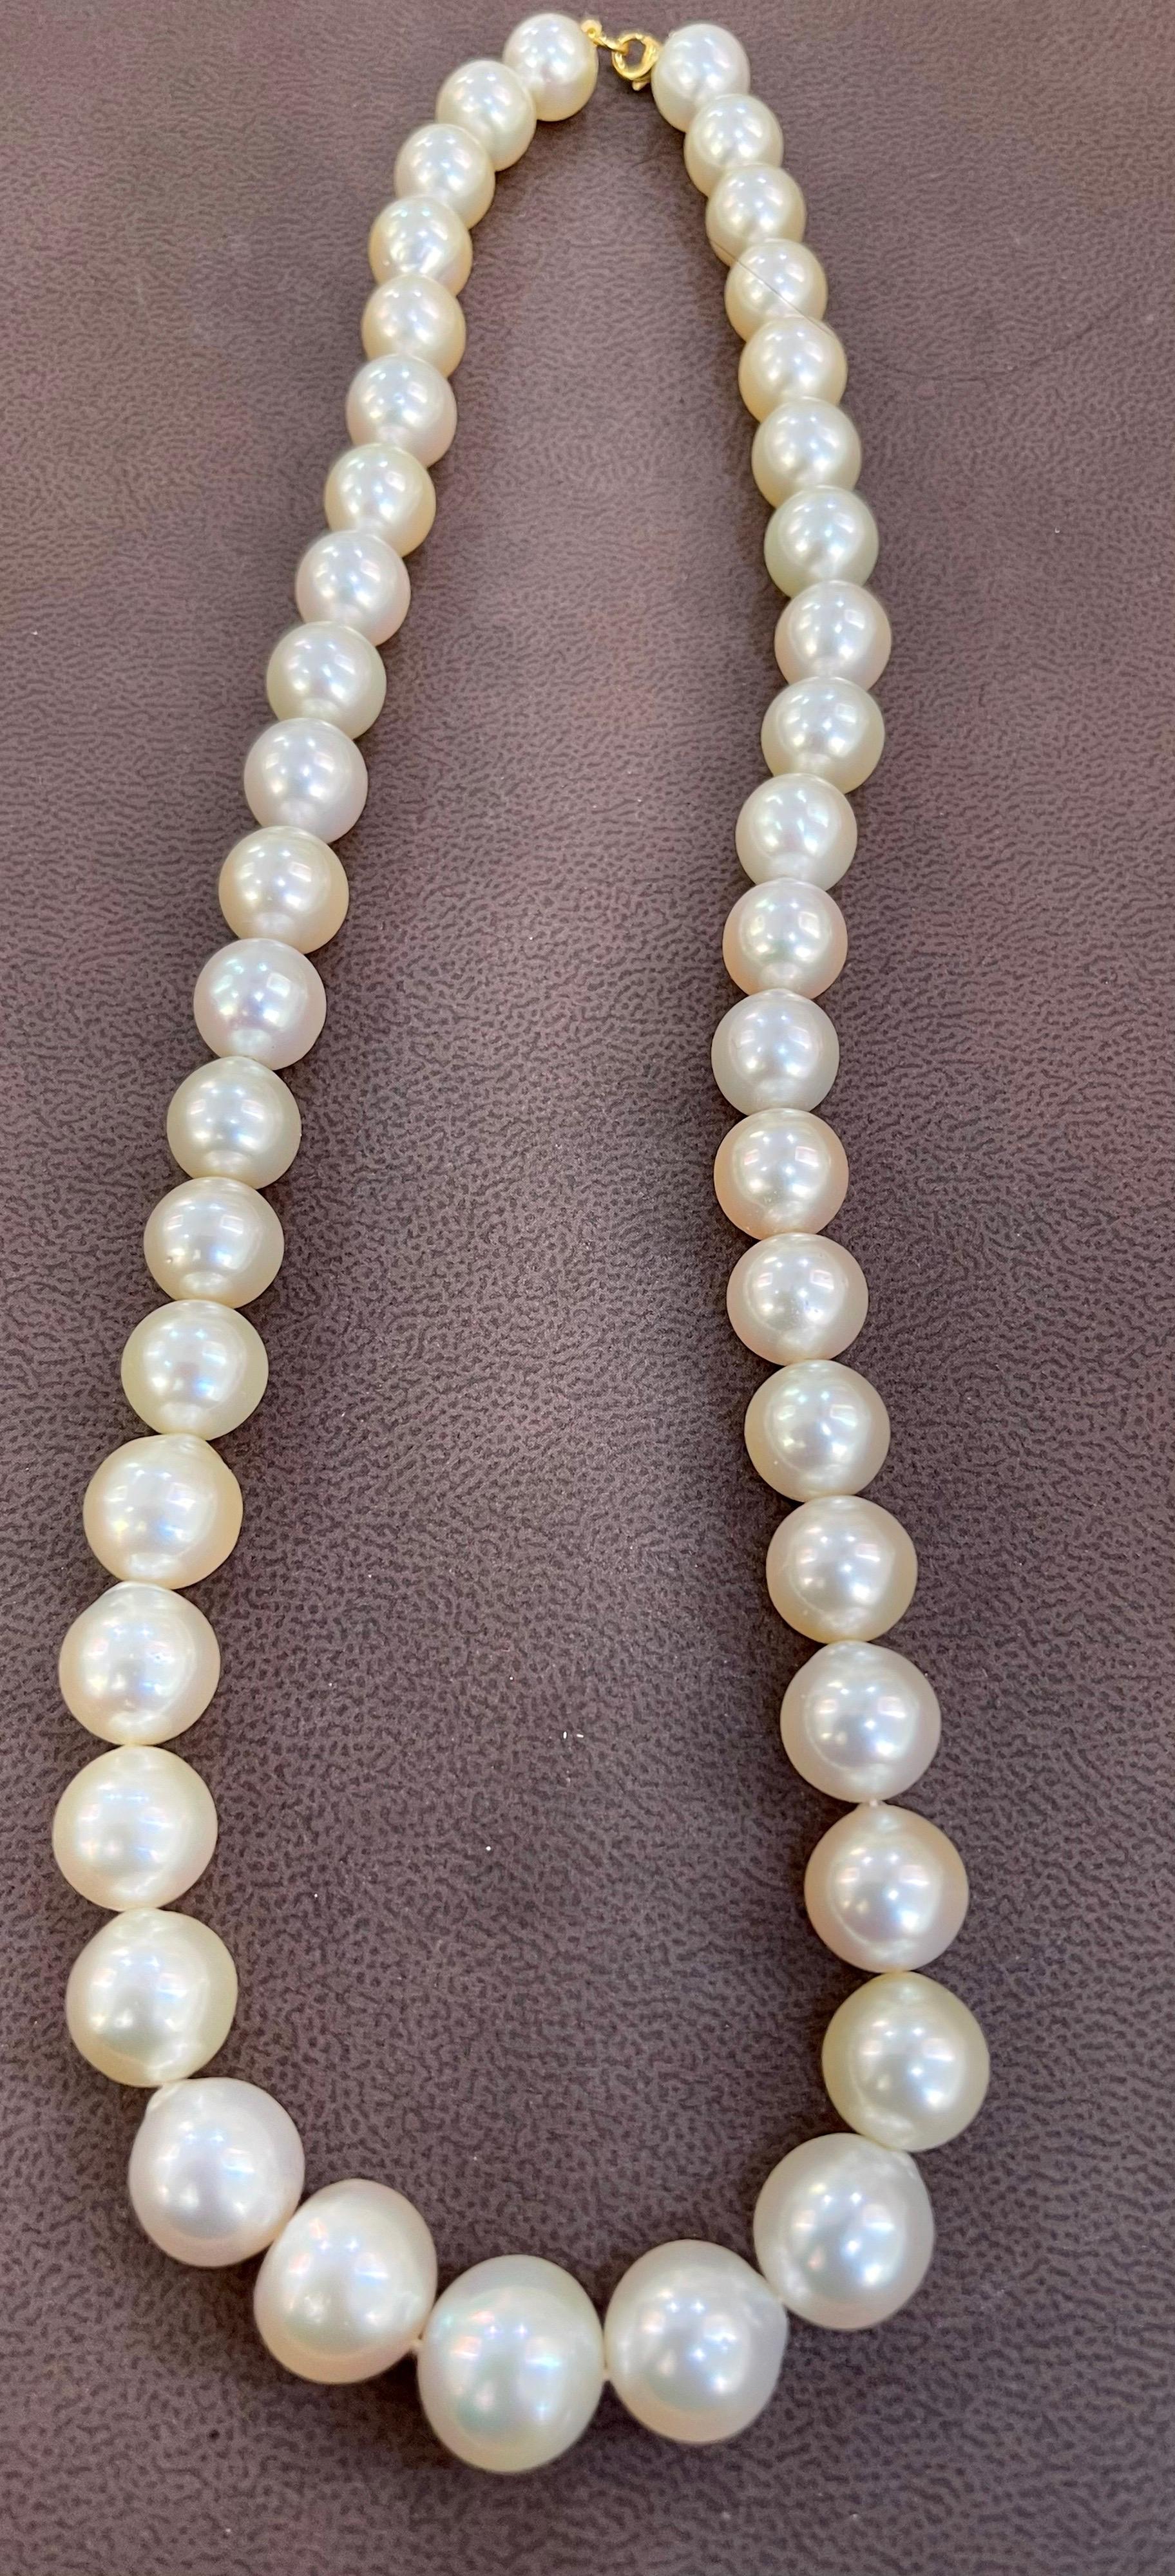 Graduating Cream Color South Sea Pearls Necklace 14 Karat Yellow Gold Clasp For Sale 9